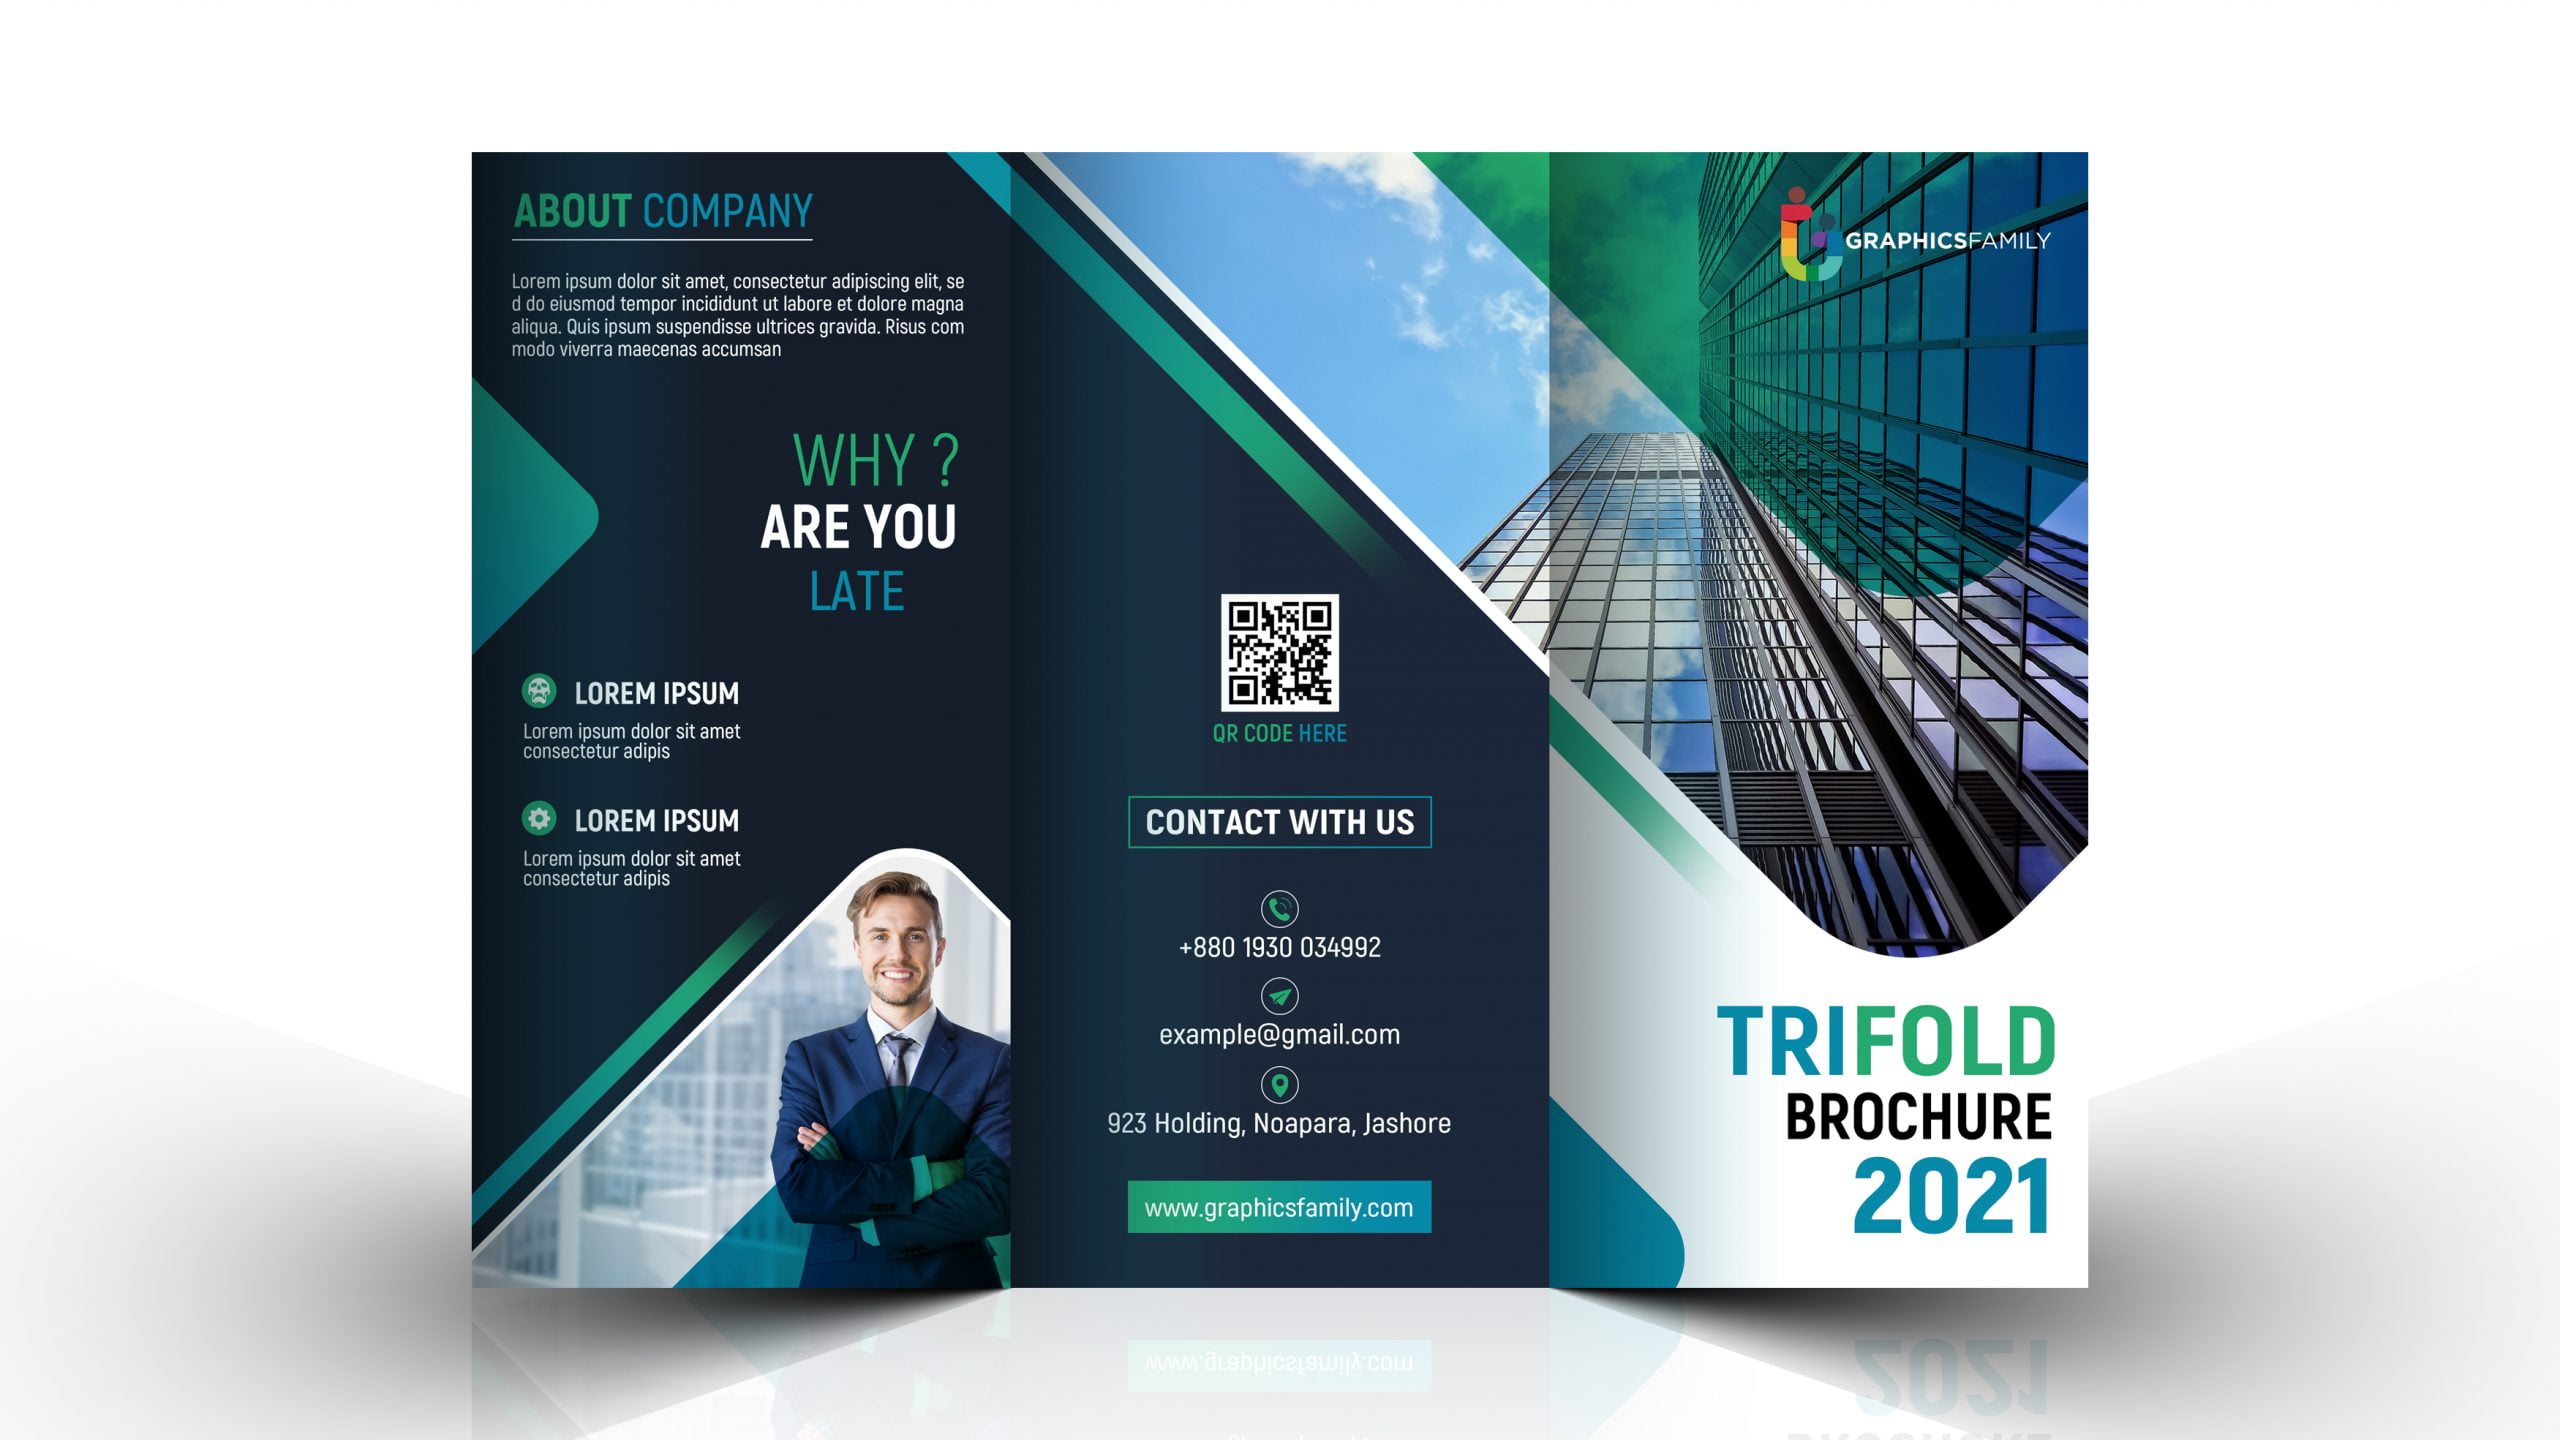 Company Trifold Brochure Design Template PSD Free Download